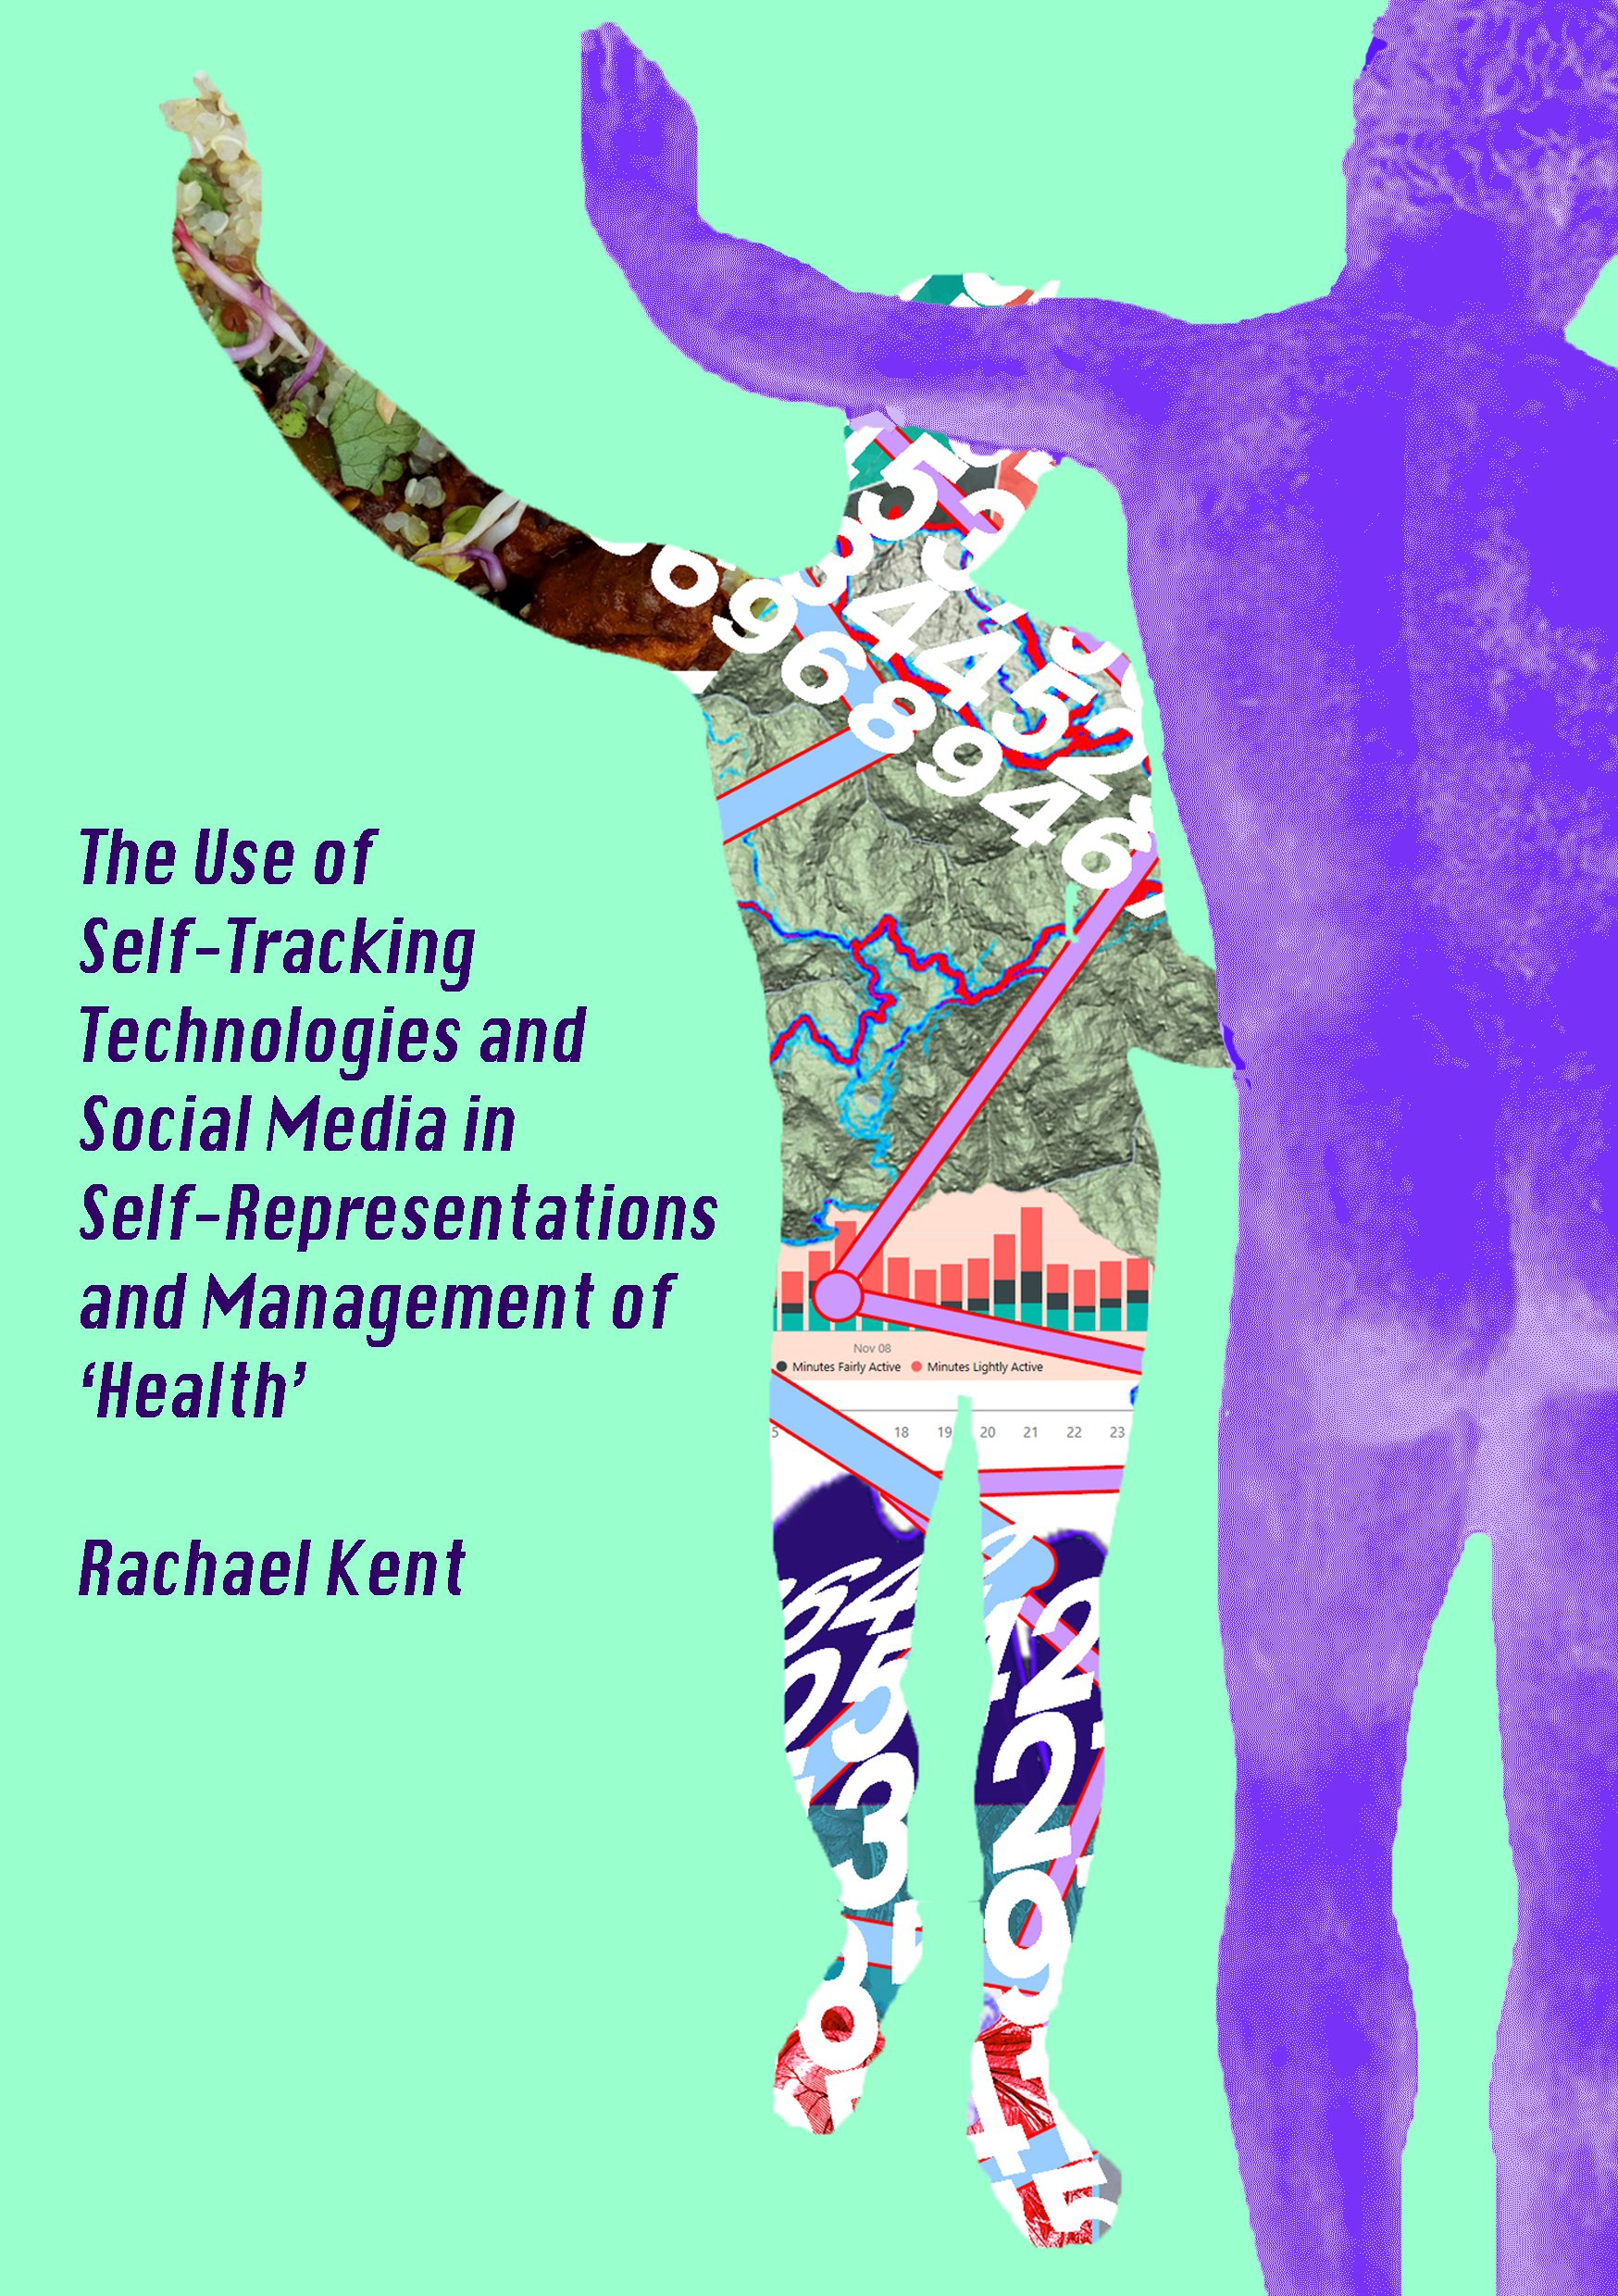 The Use of Self-Tracking Technology and Social Media in Self-Representations & Management of Health, Rachael Kent + 2 pix of humans, one purple, the other with strings of numbers a+ data visualisations symbolizing the data-health connection.